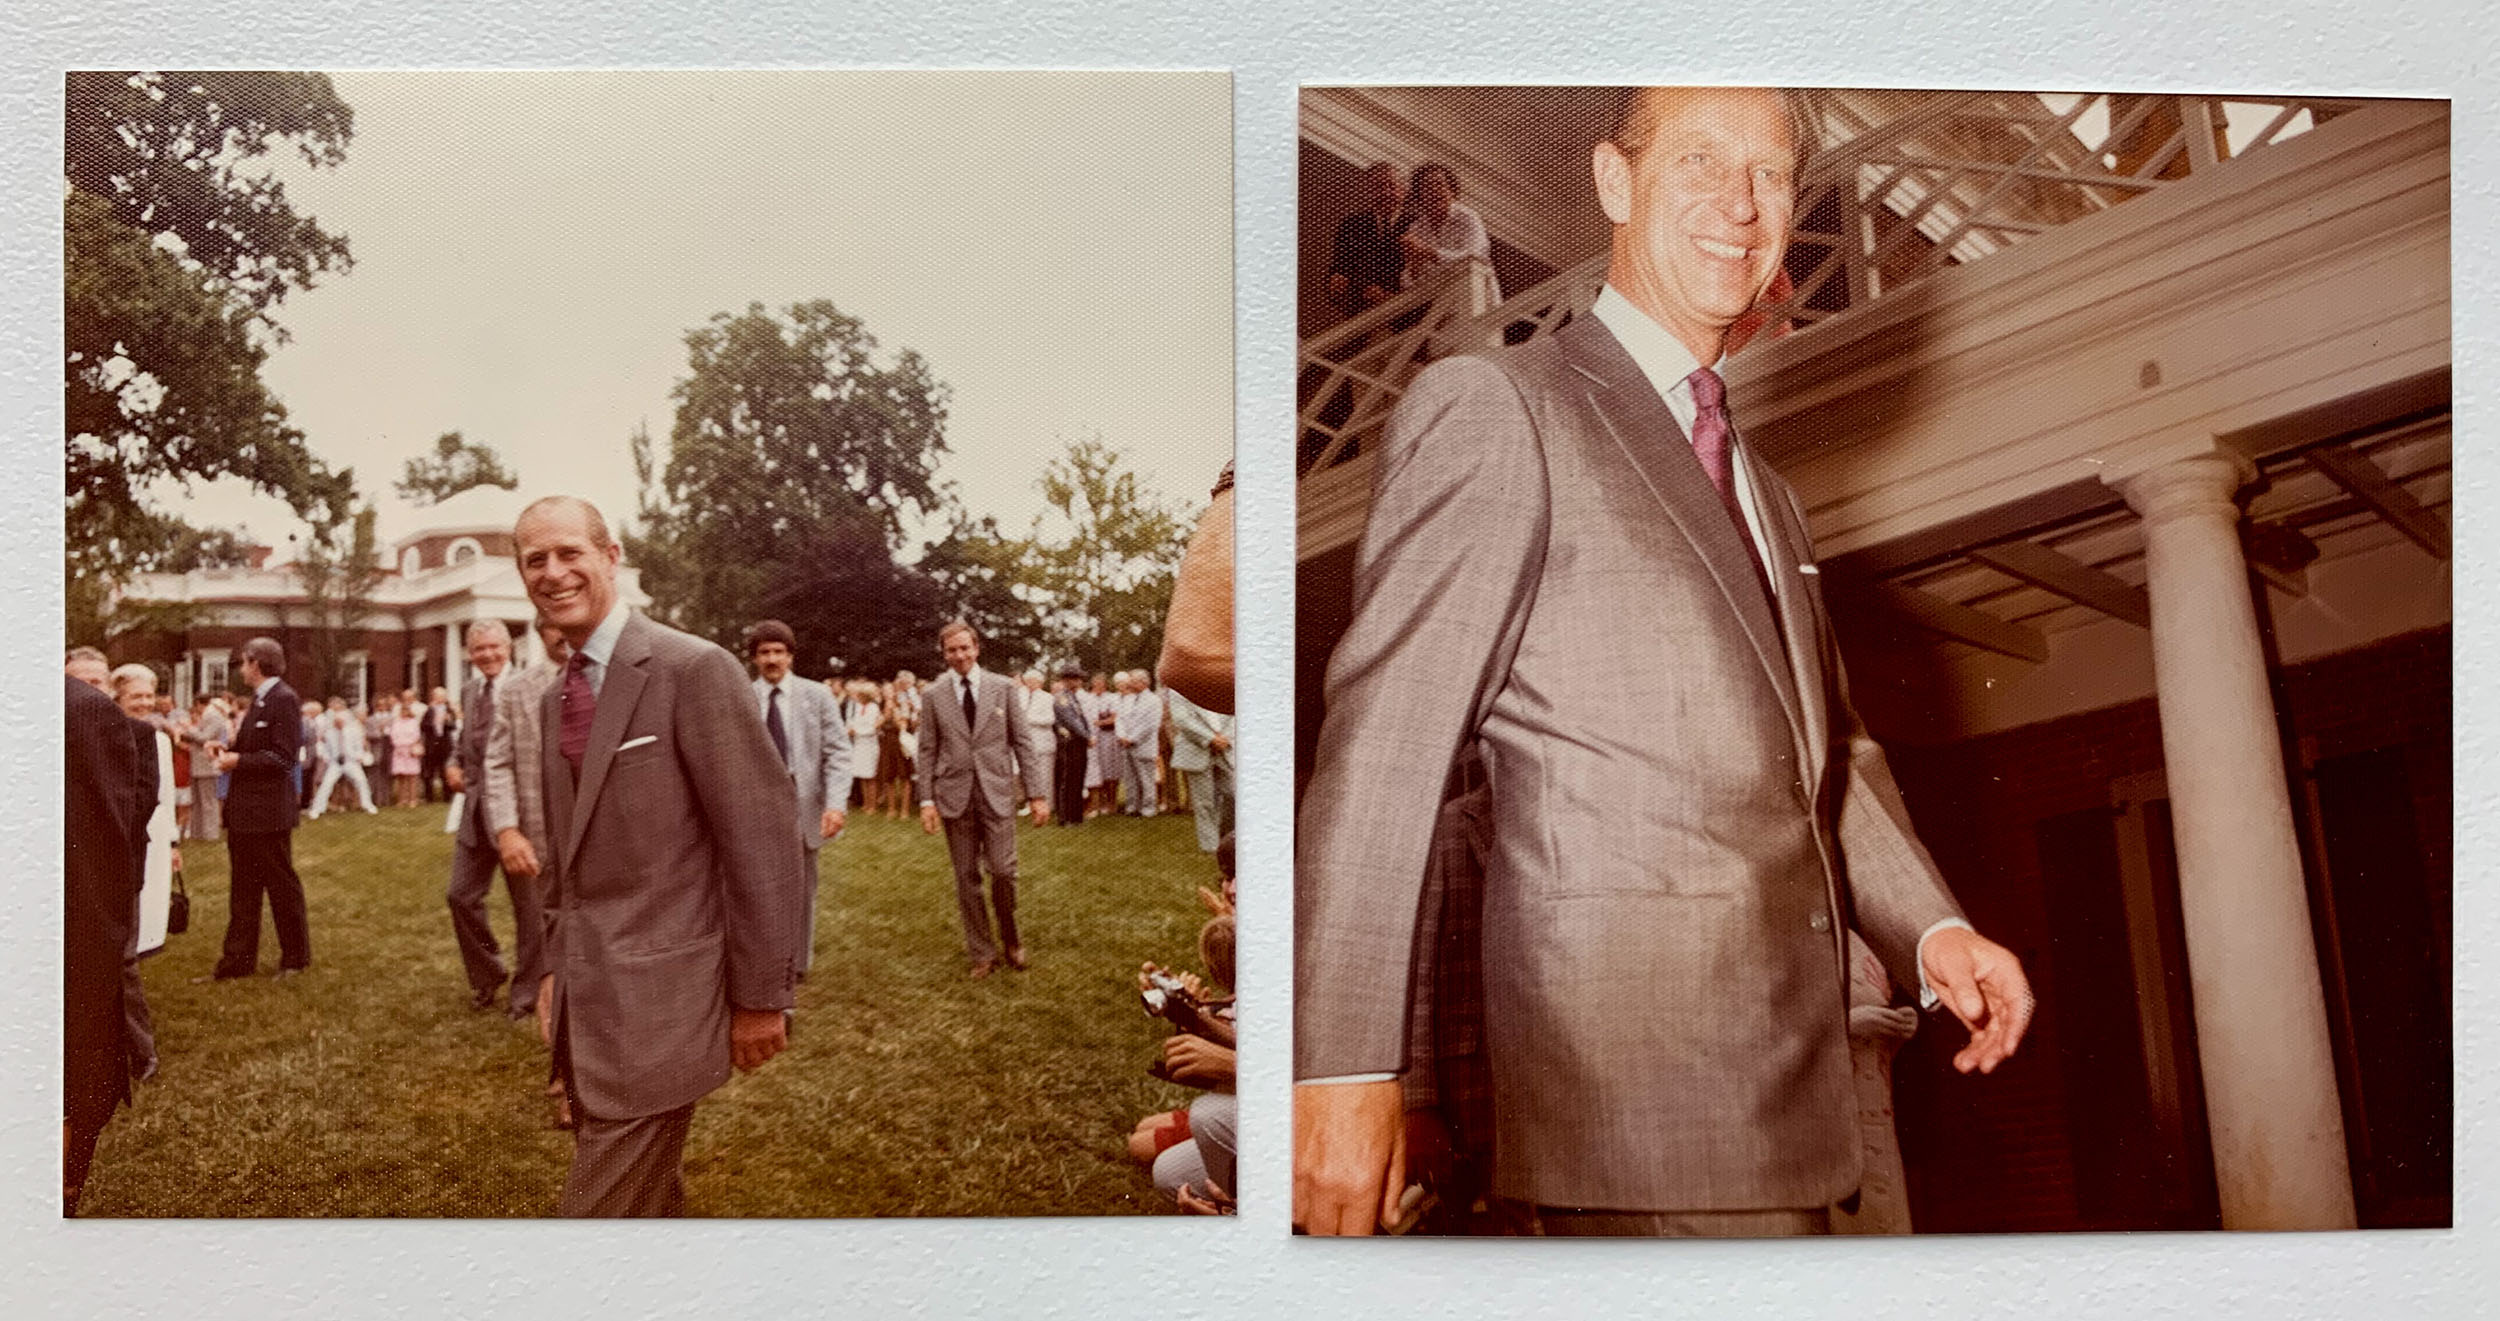 Prince Philip at Monticello, left, and on the Lawn at UVA, right